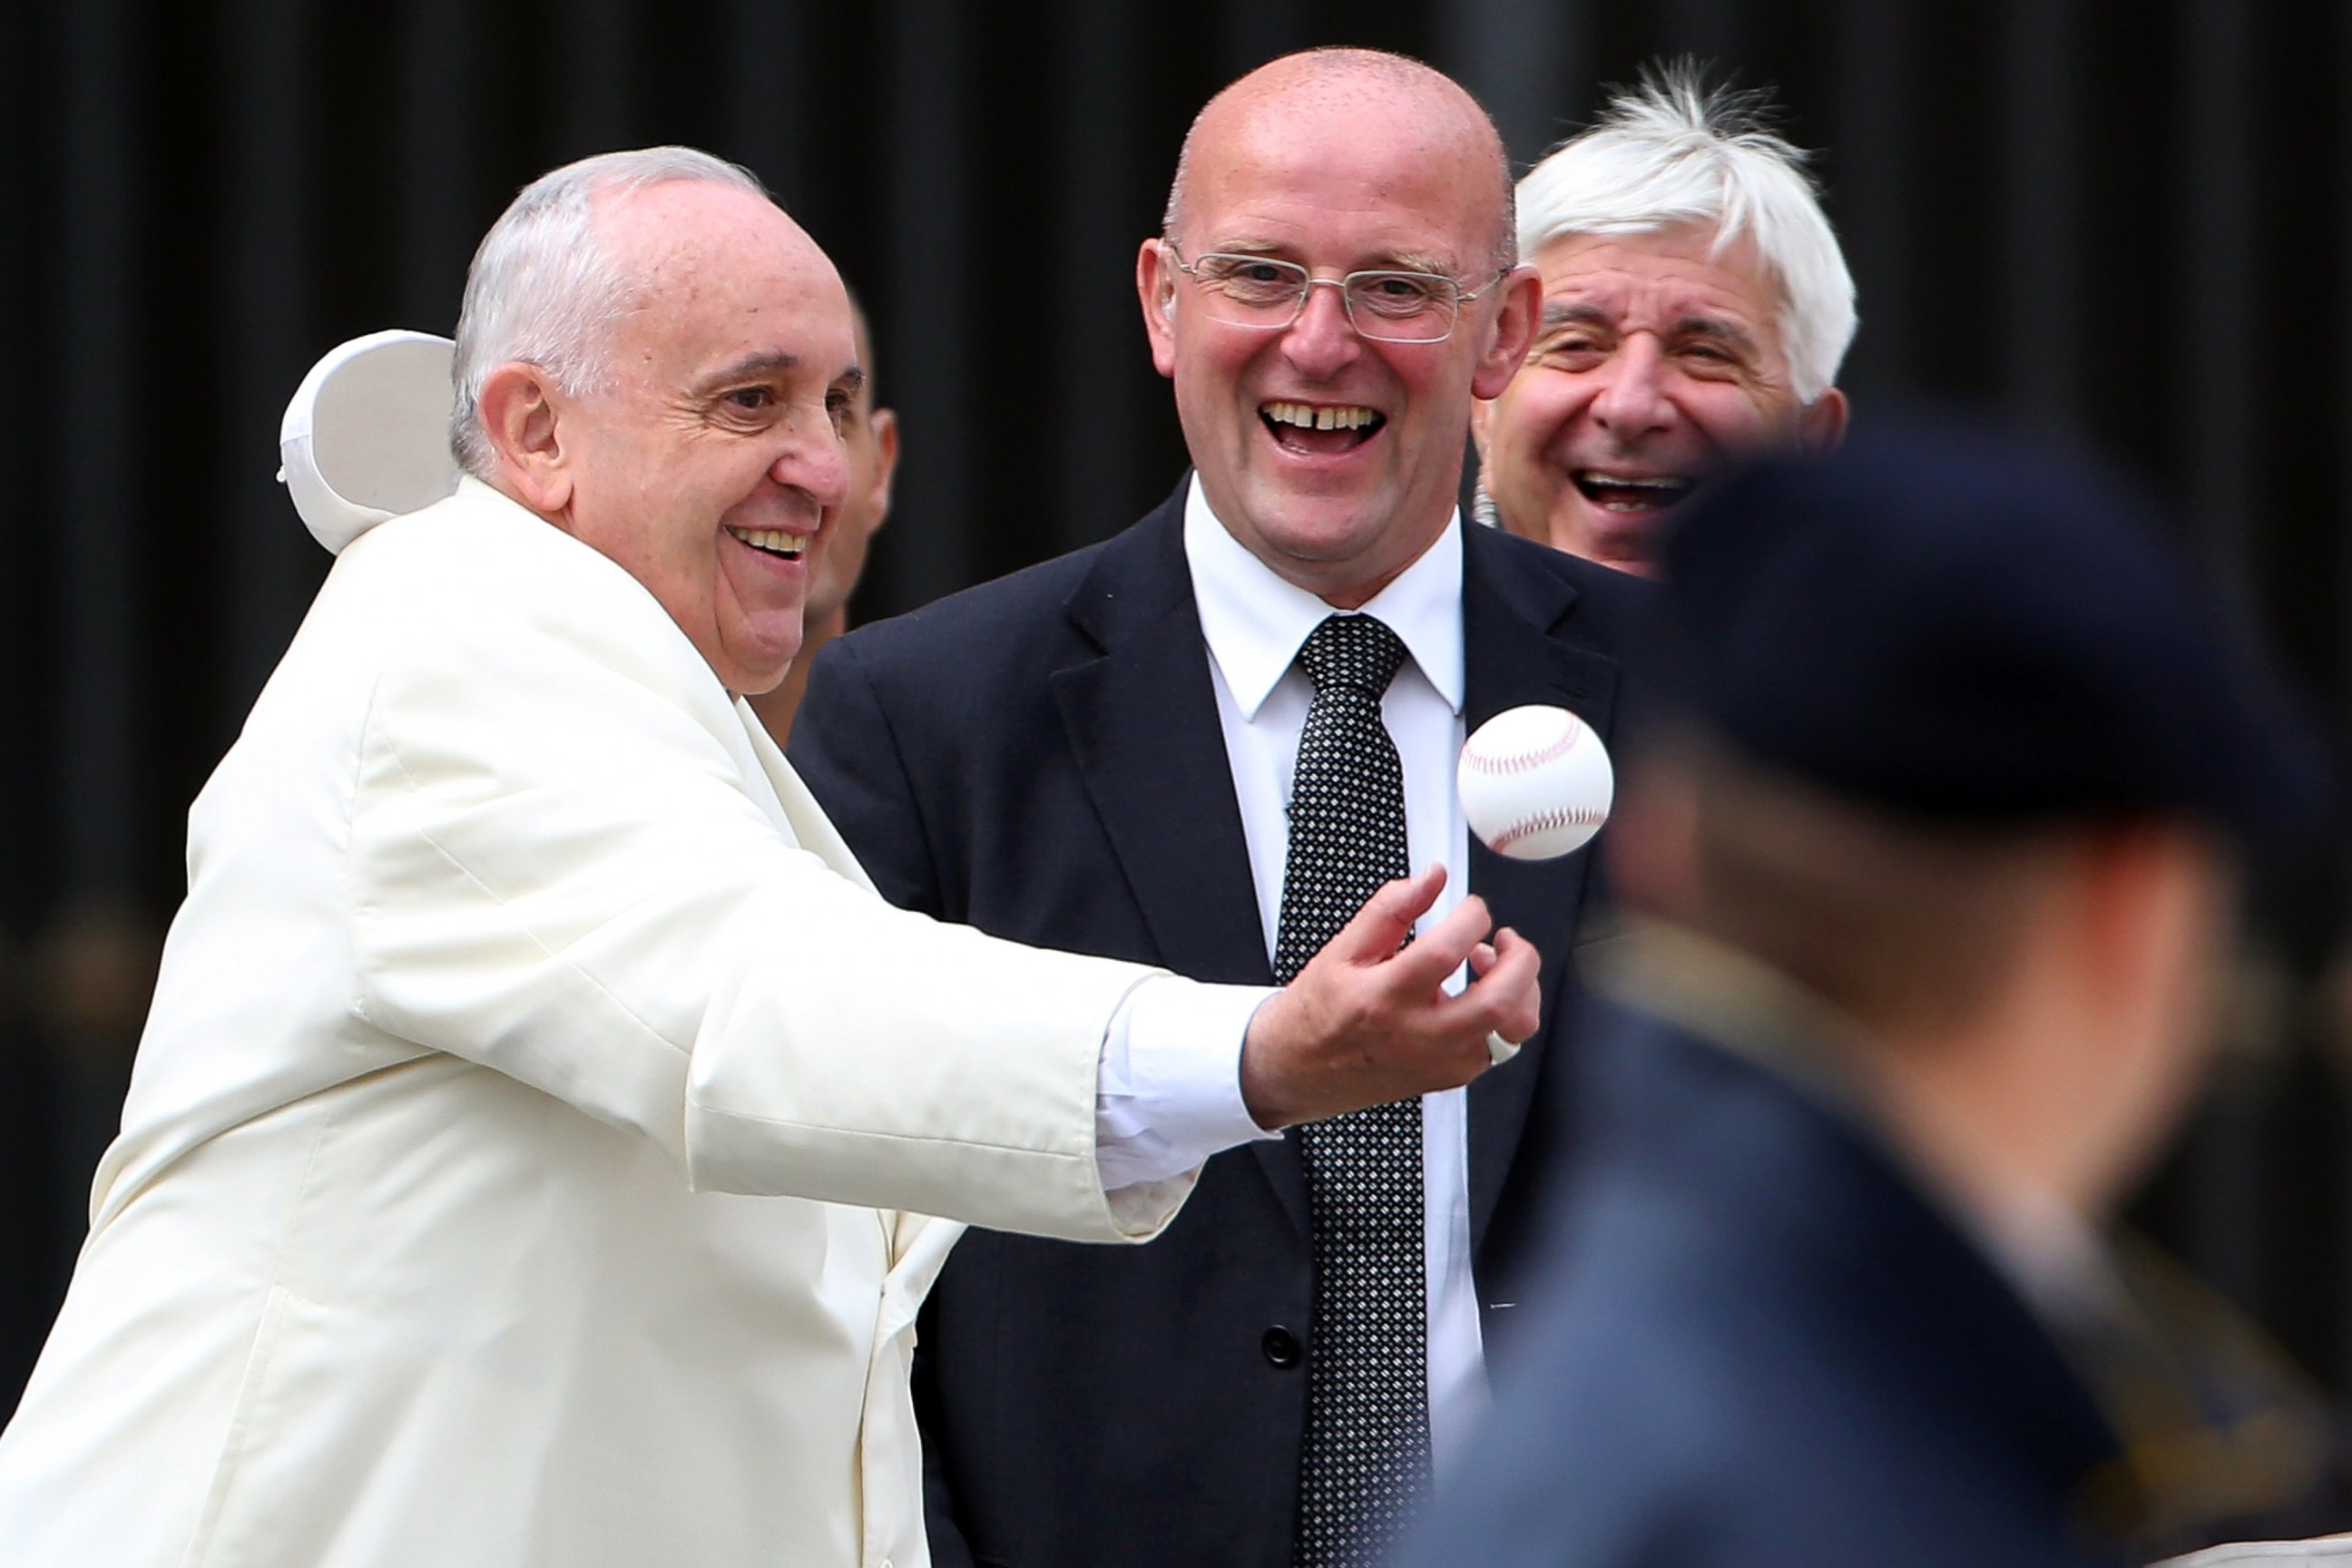 PHOTO: Pope Francis loses his 'papalina' cup as he reaches to catch a baseball ball thrown by a faithful at the end of his weekly audience at St. Peter's Square on Sept. 24, 2014 in Vatican City, Vatican.